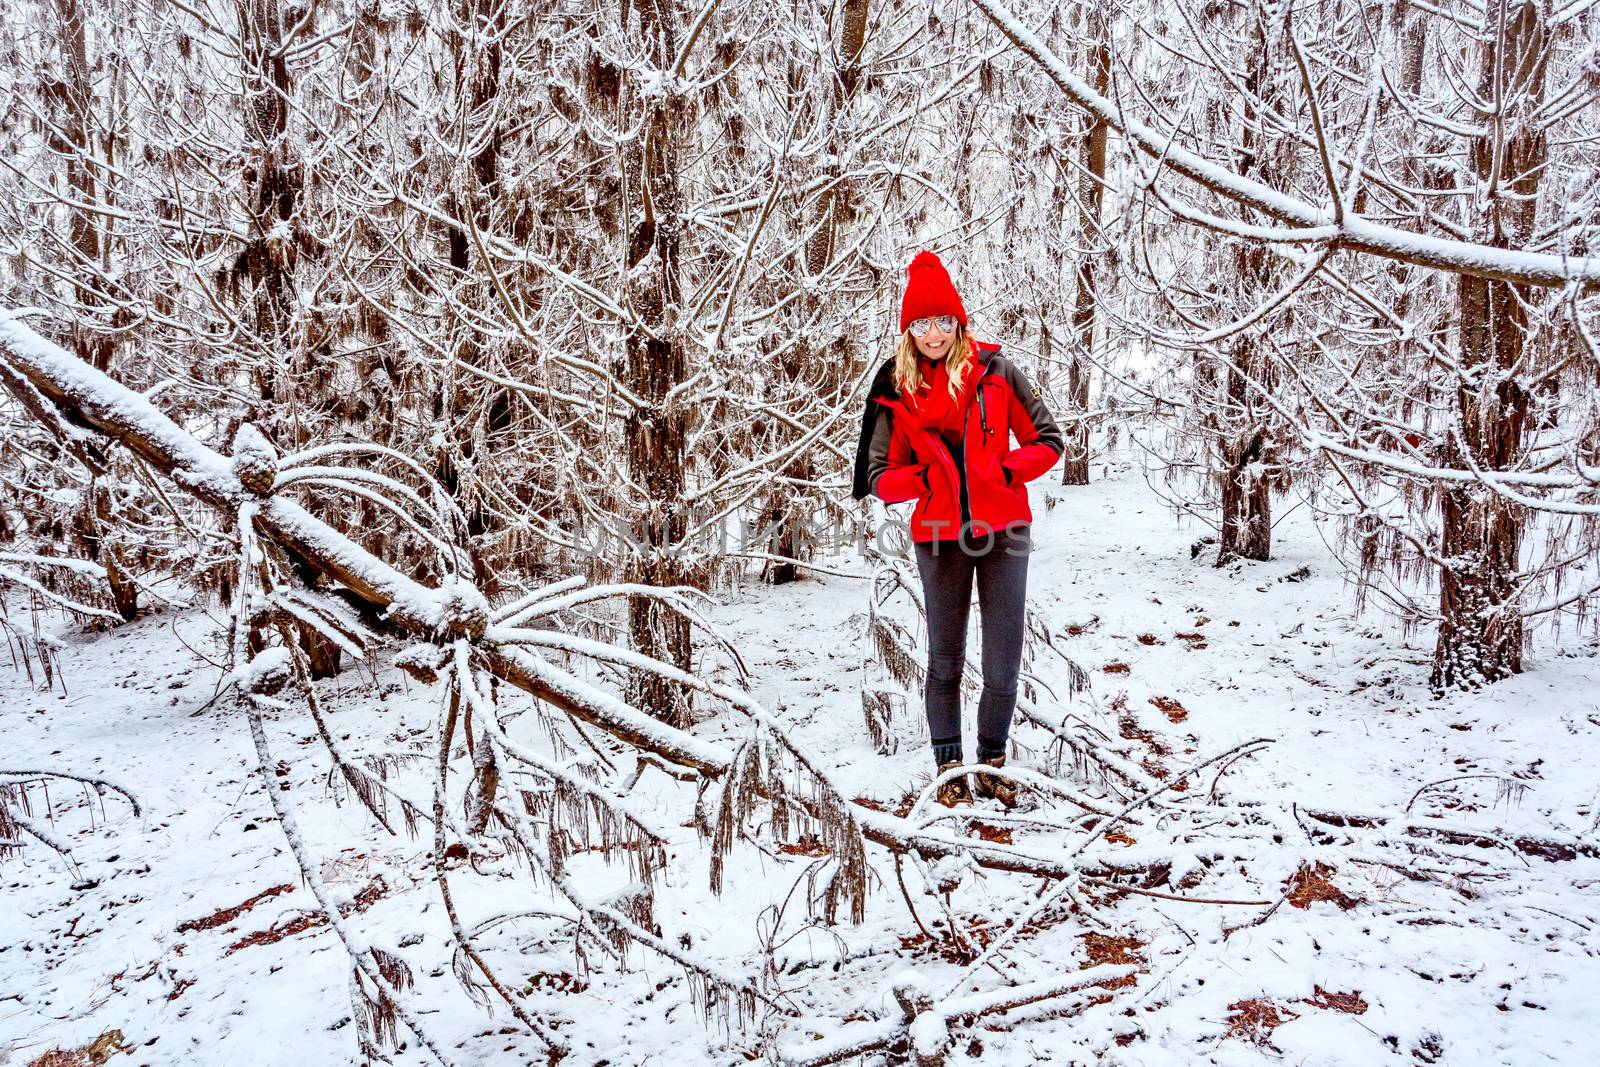 Walking through pine forest of pine trees covered in snow by lovleah